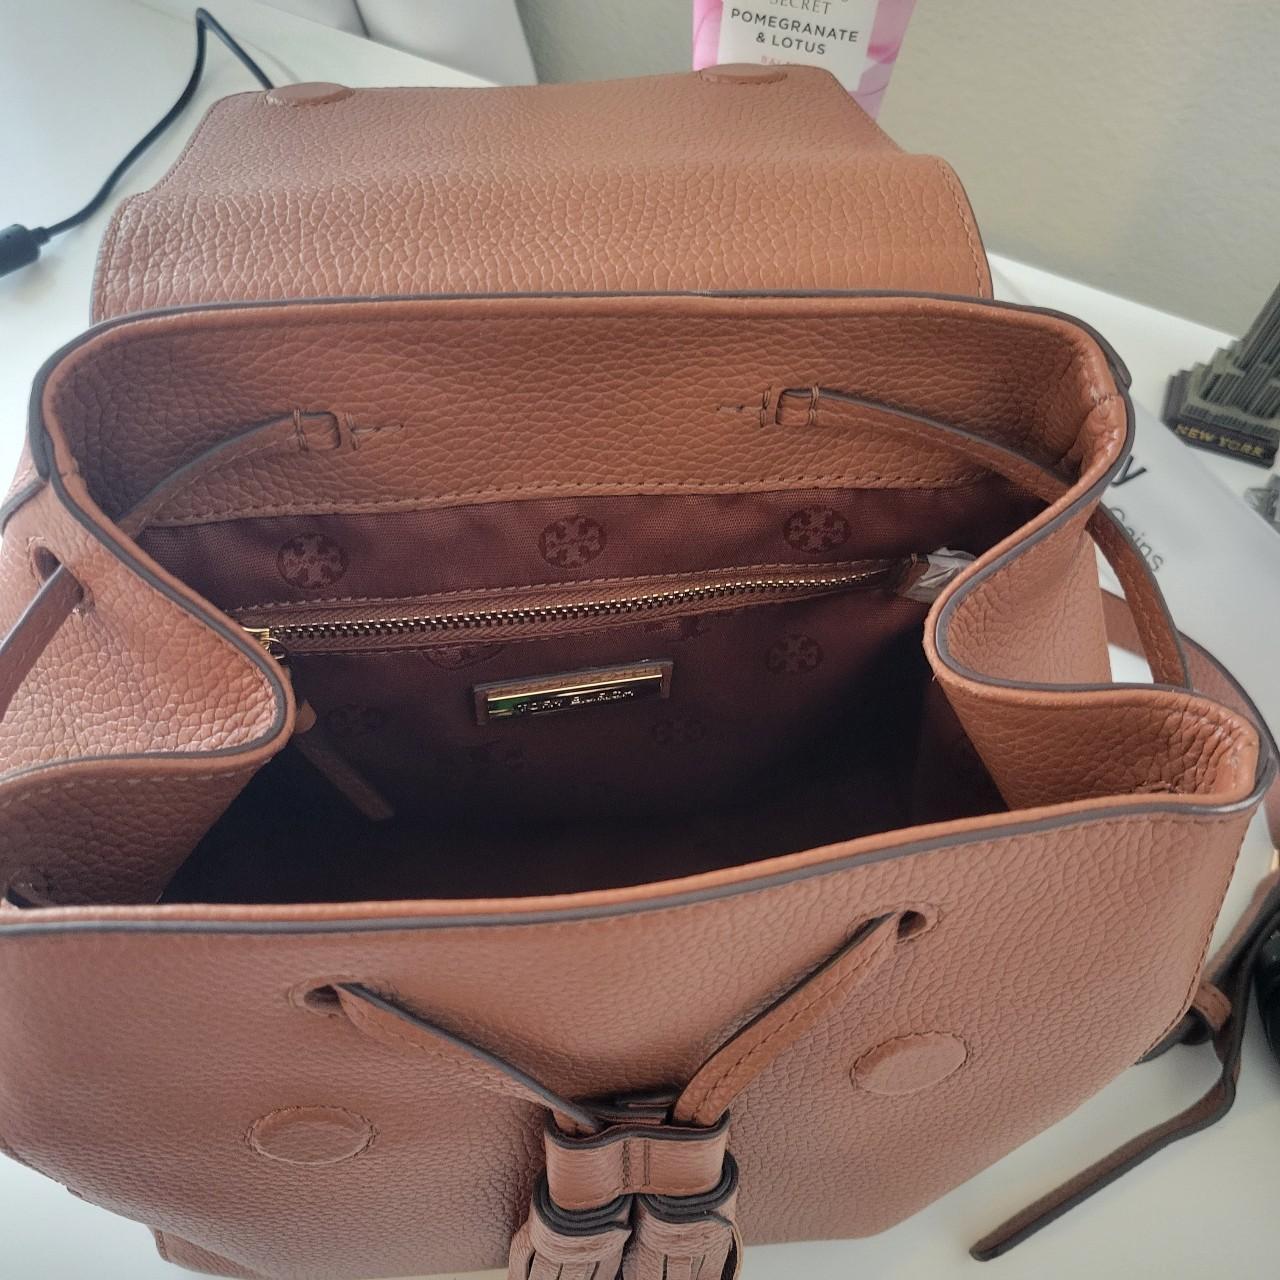 Tory Burch Thea Mini backpack. Great for work or - Depop